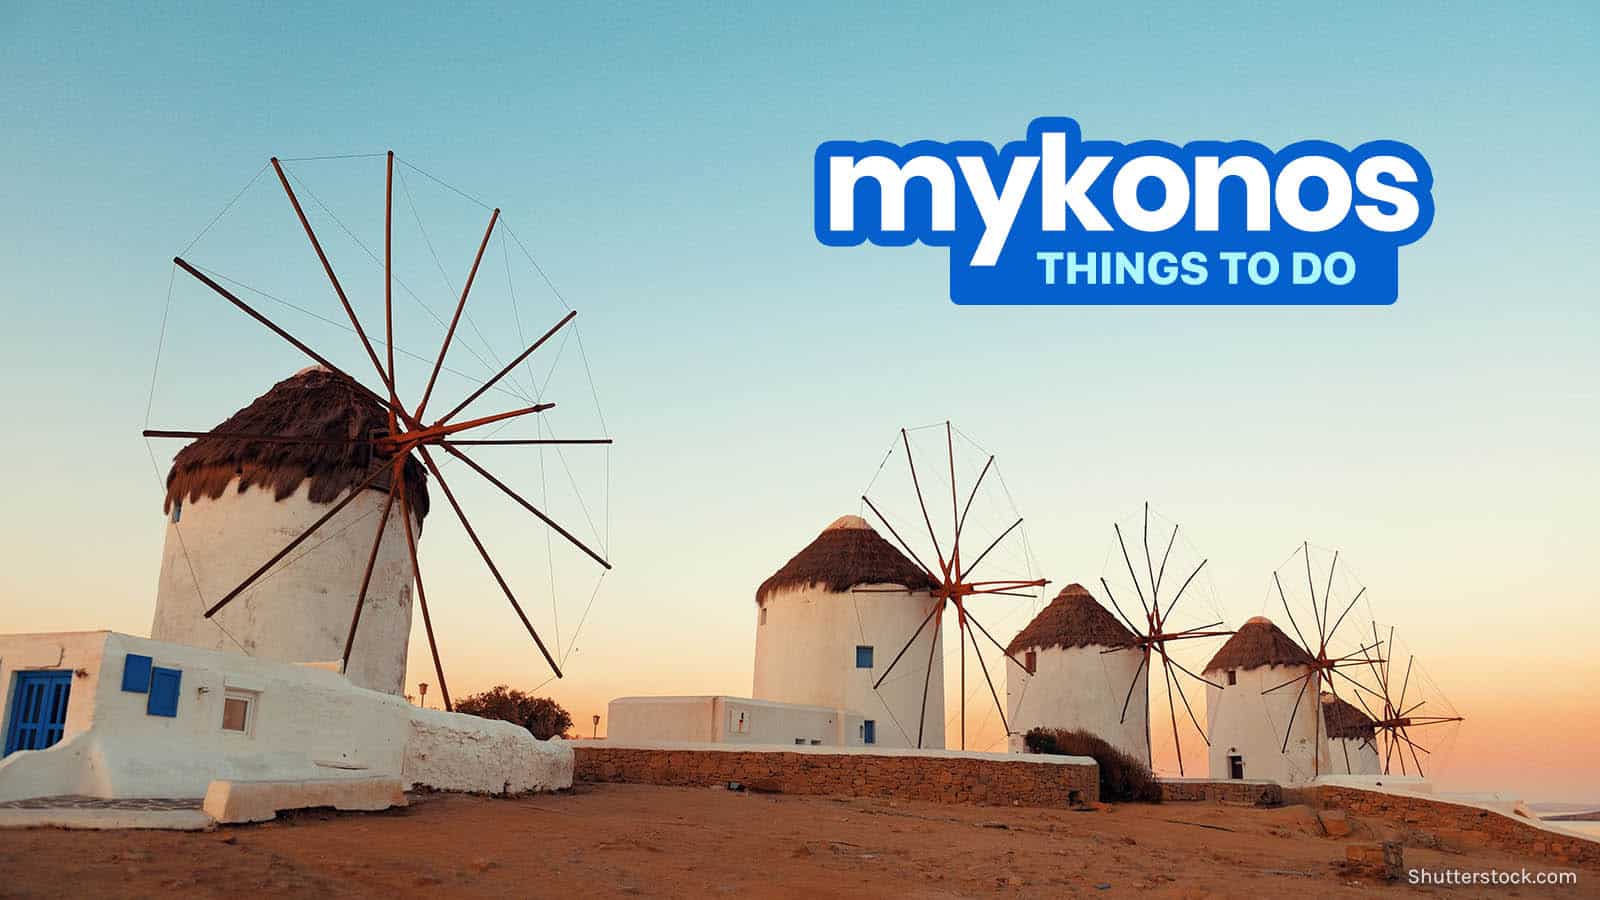 THINGS TO DO IN MYKONOS: Beaches, Clubs & Other Tourist Spots